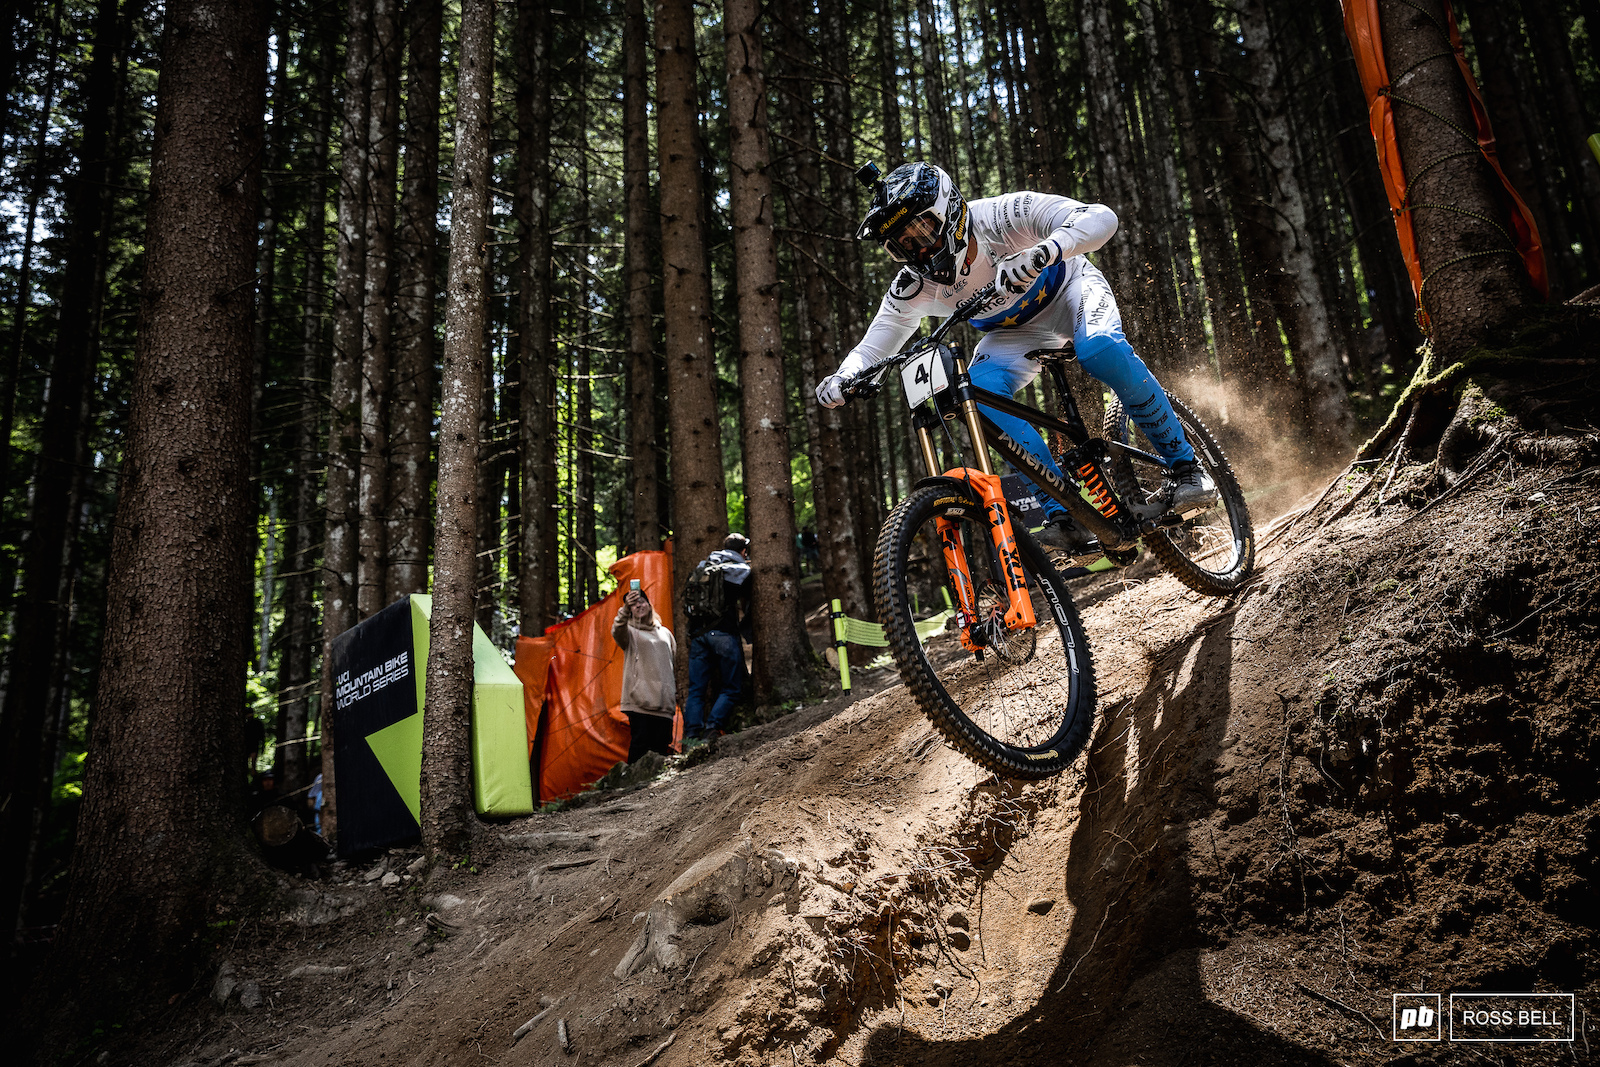 Andreas Kolb ripping through the steep lower woods.